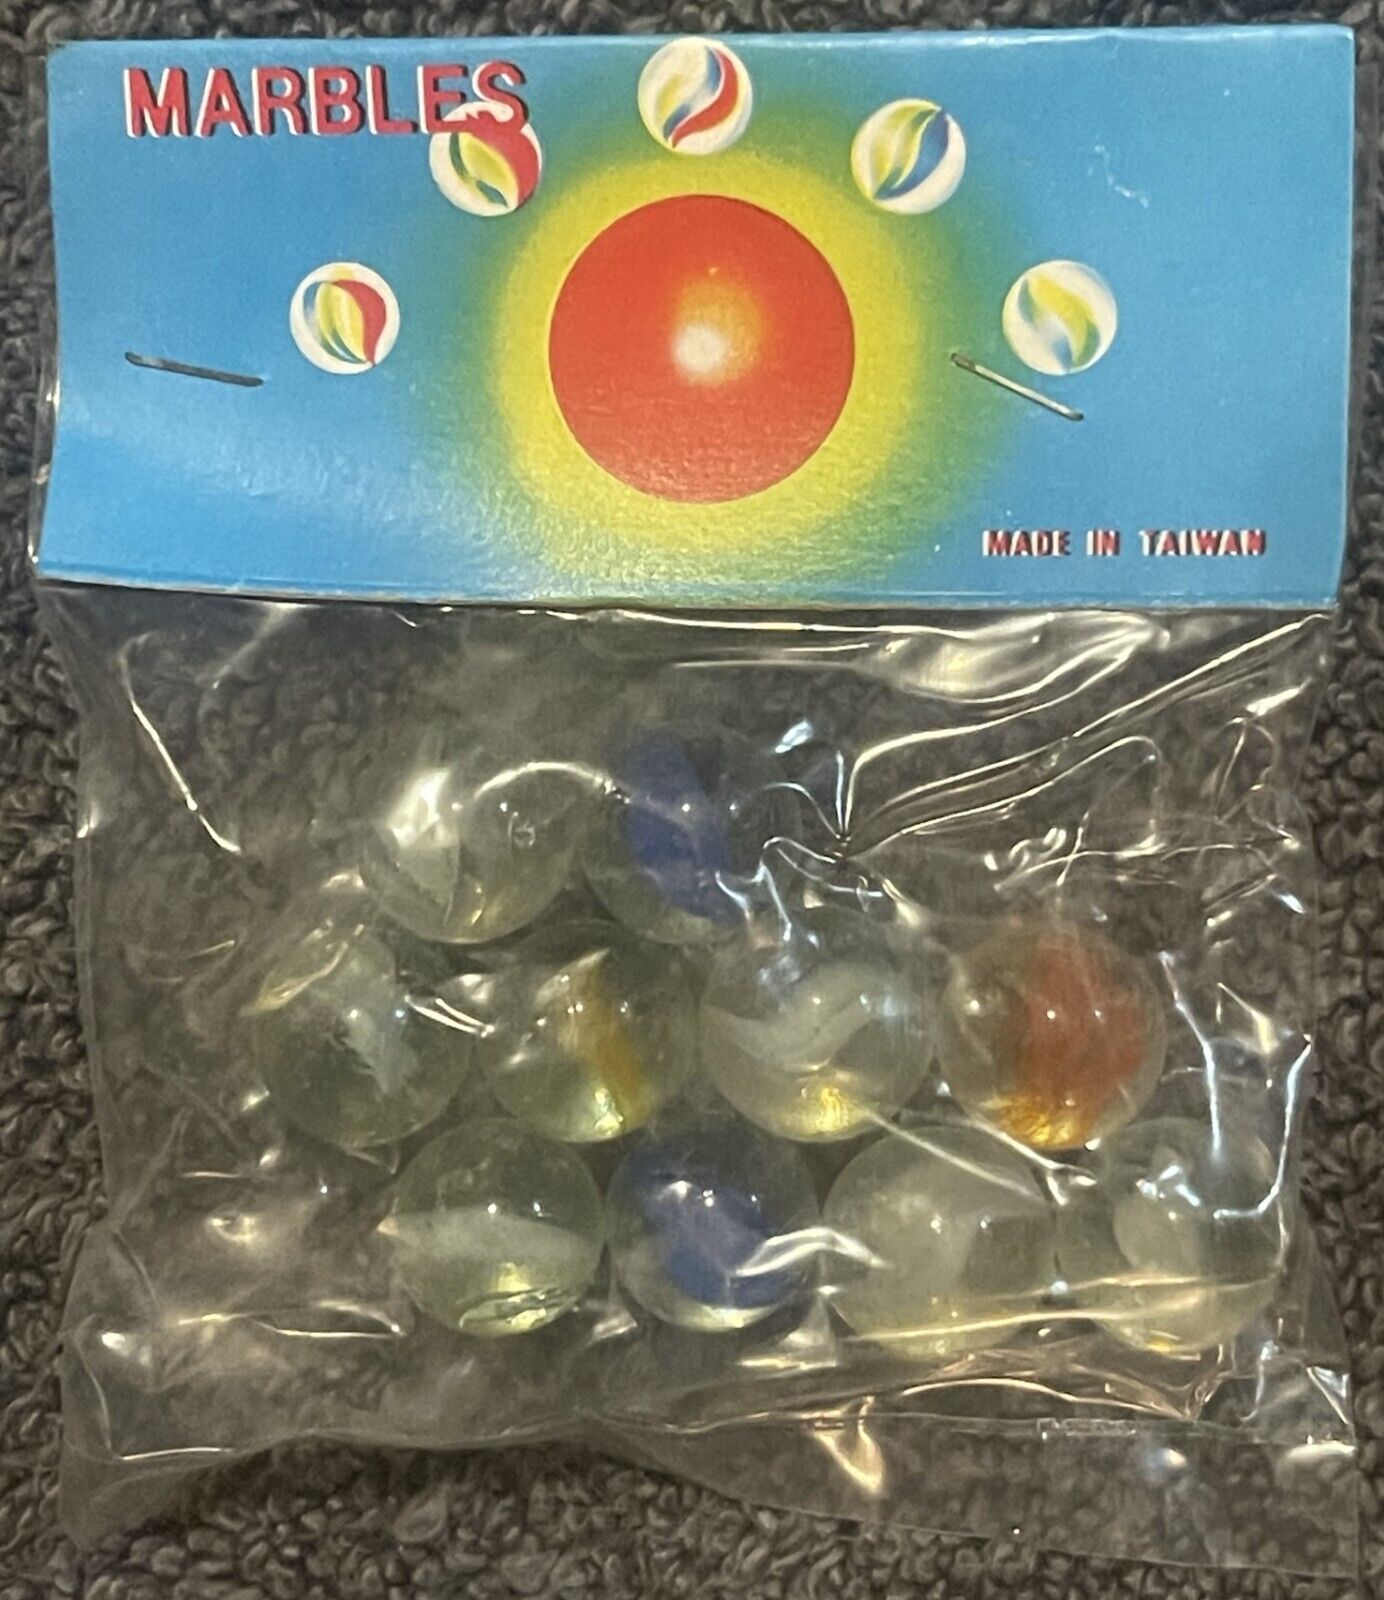 Vintage 1950s Cats Eye Marbles, Unopened in Package, Childhood Classic